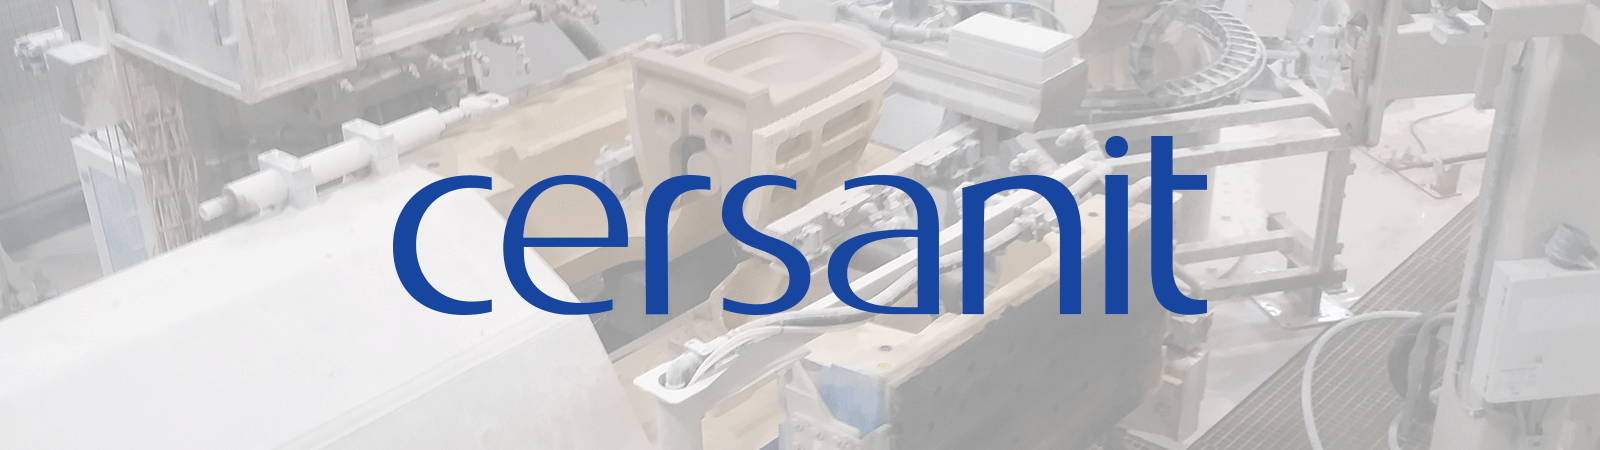 Cersanit Poland aims for total automation with SACMI technology